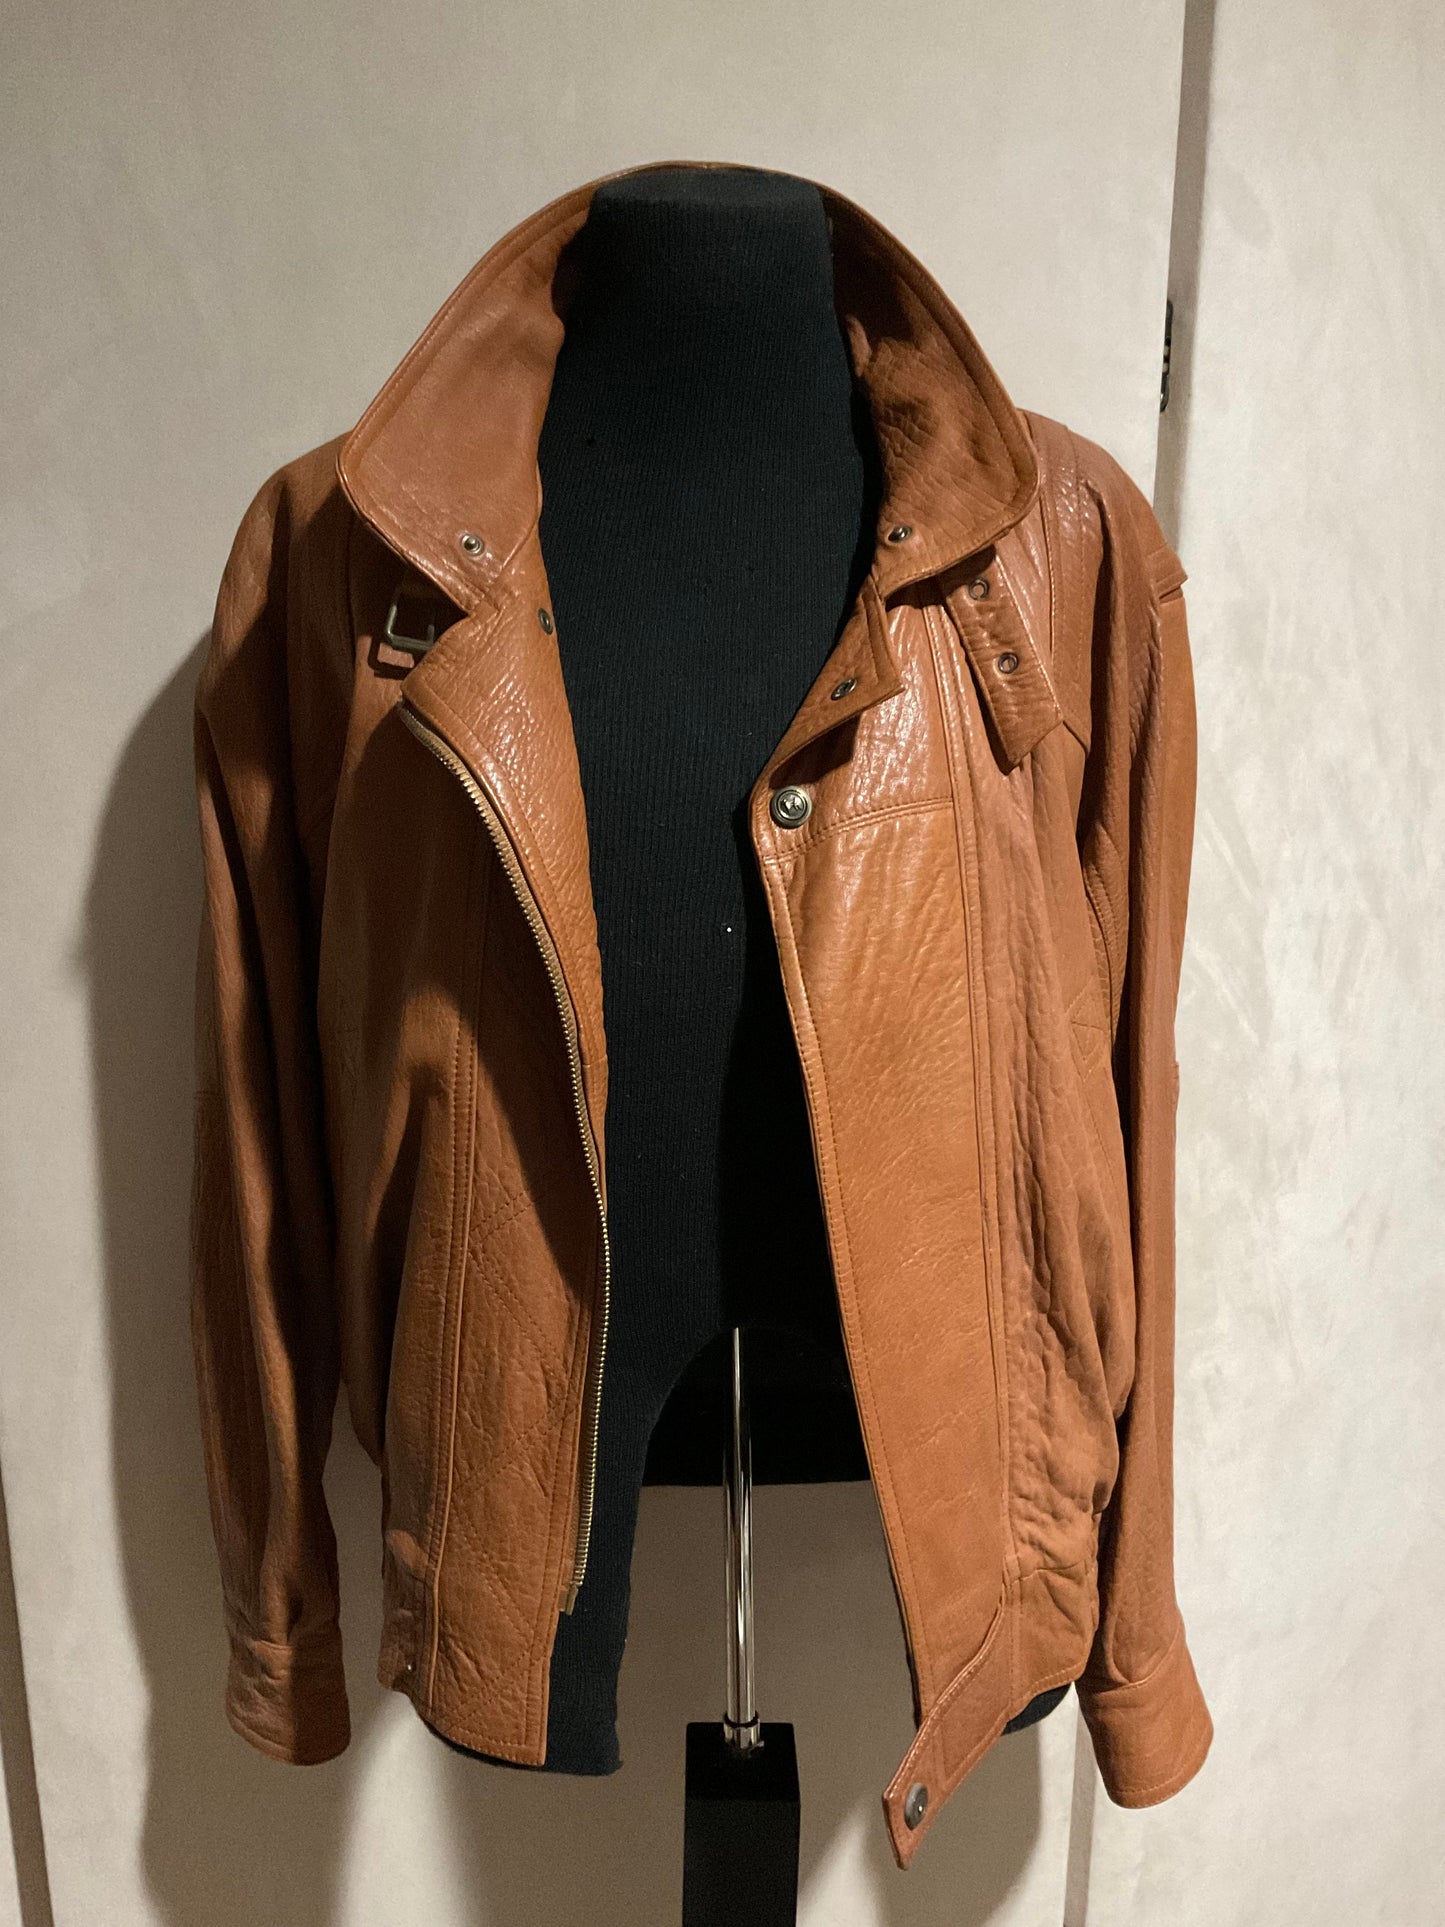 R P LEATHER JACKET / BROWN RUST / MEDIUM / REMOVABLE COLLAR / MADE IN –  DESIGNER VINTAGE COLLECTION